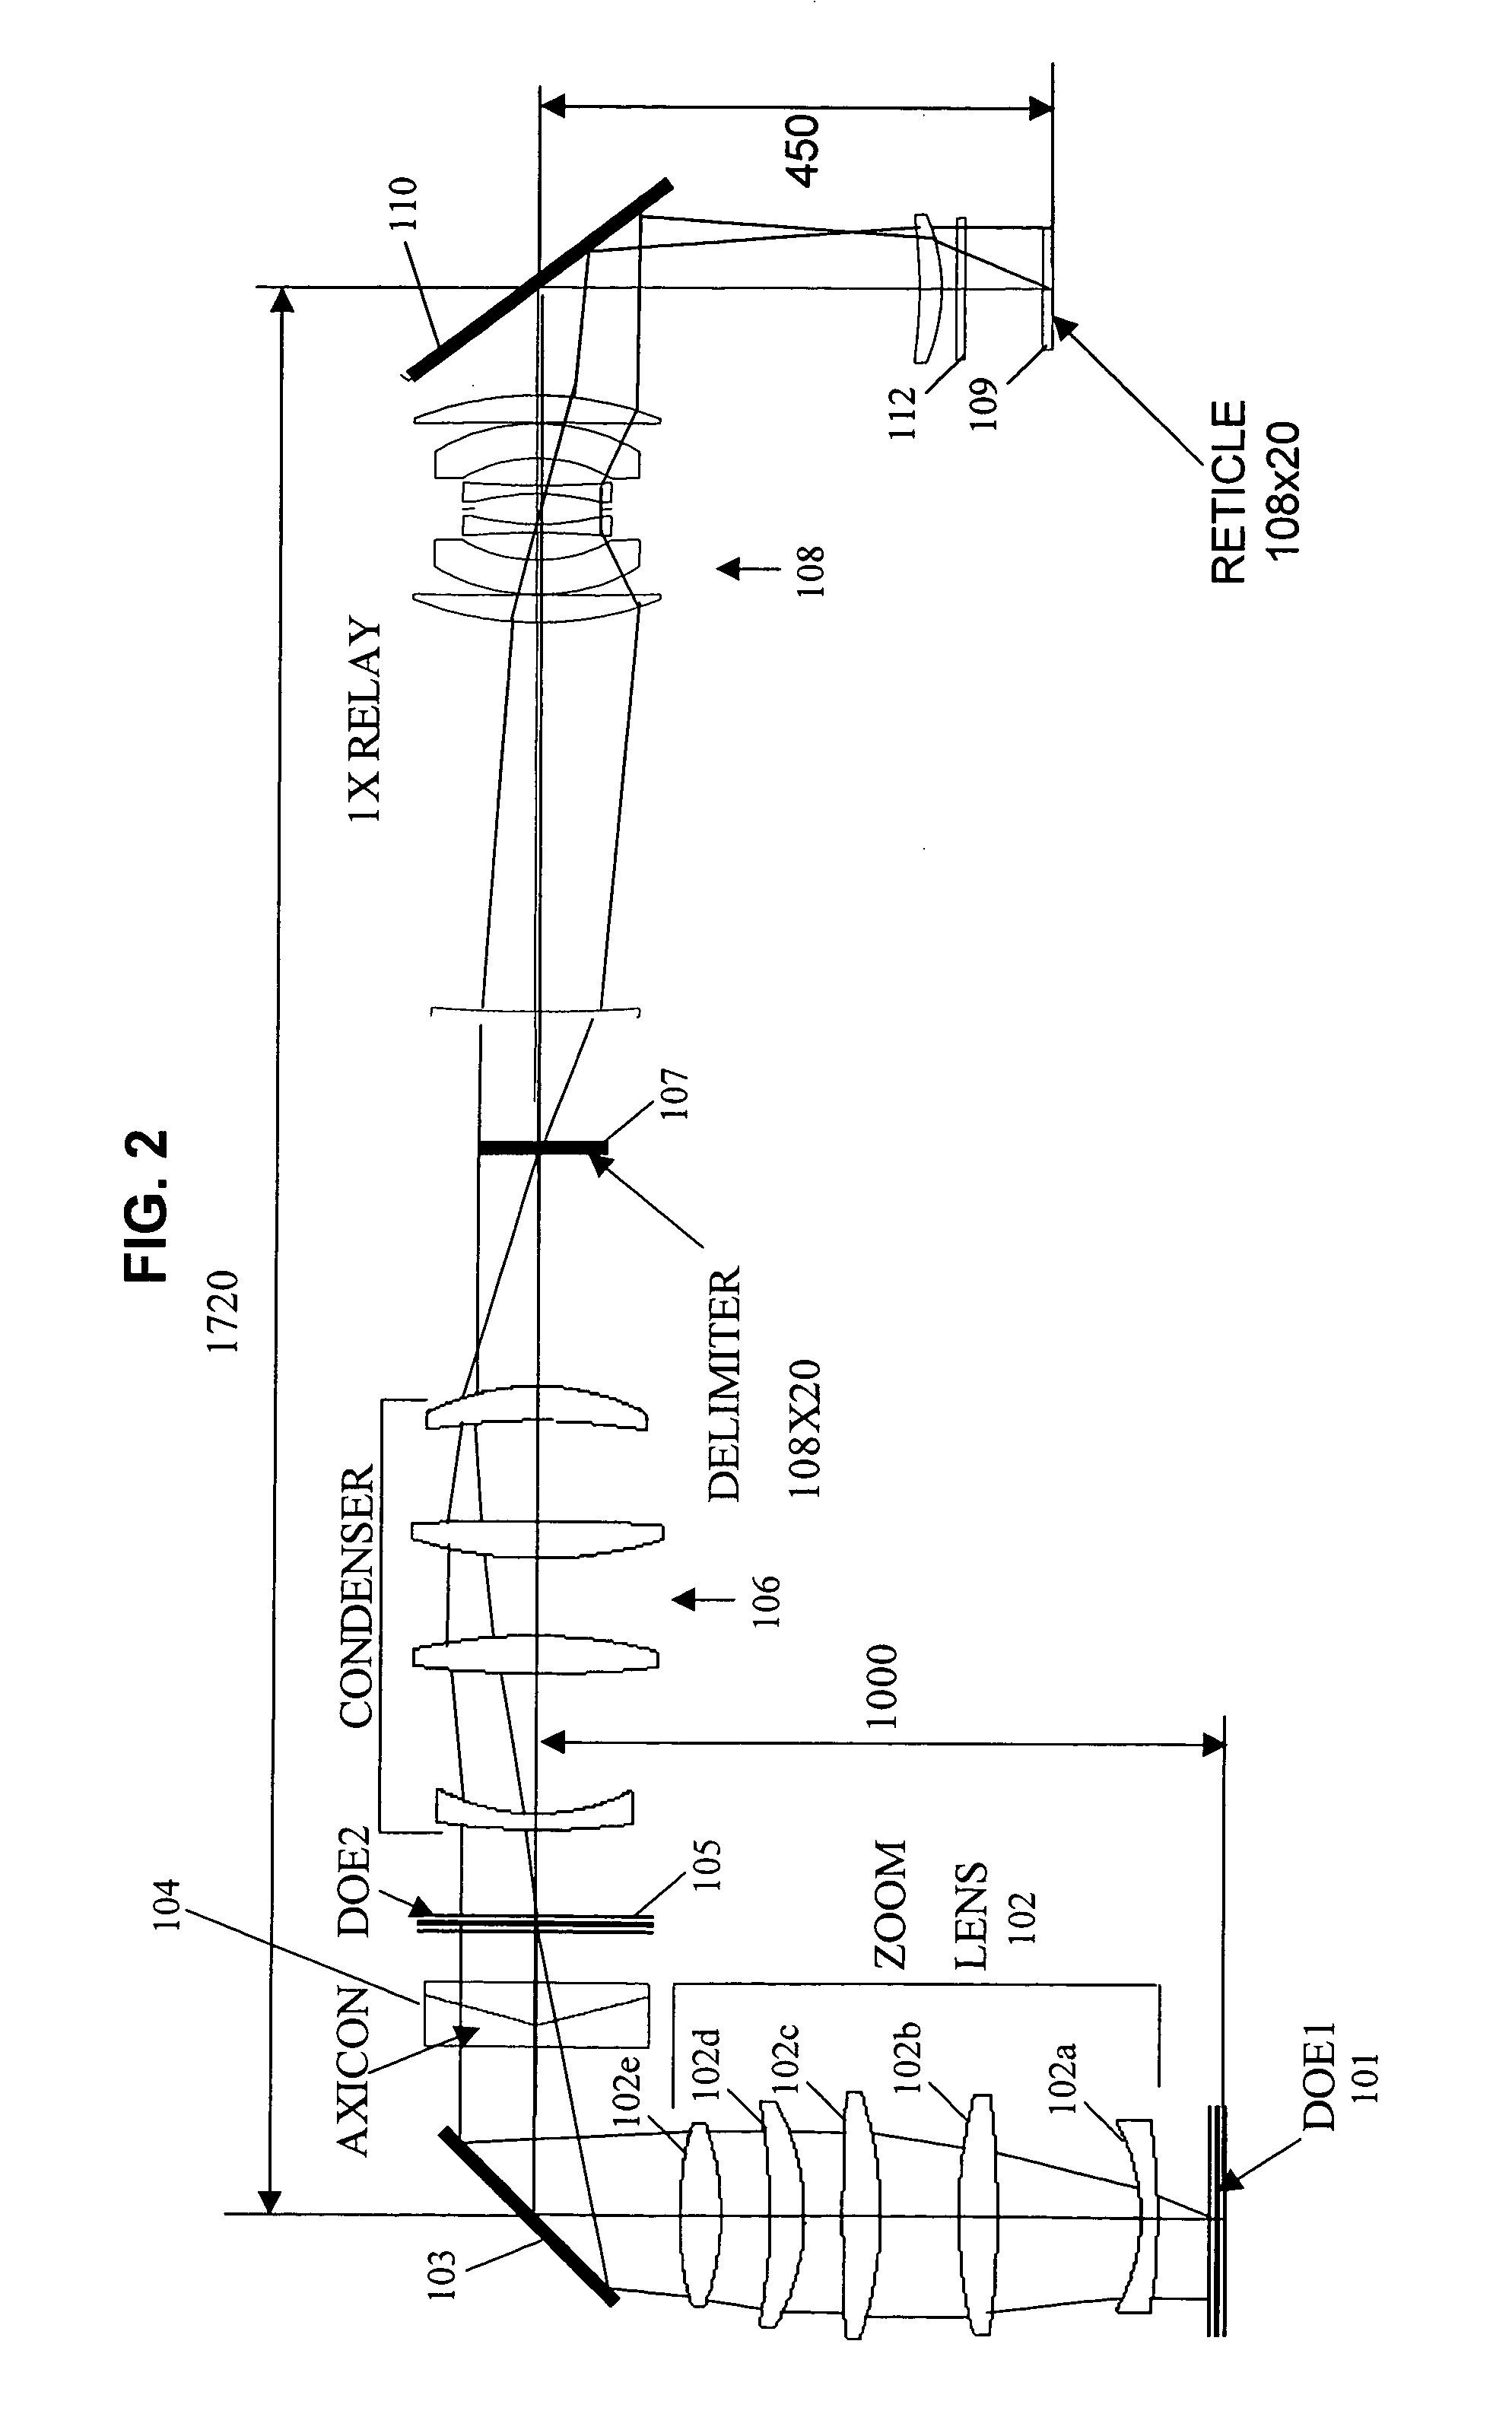 Advanced illumination system for use in microlithography